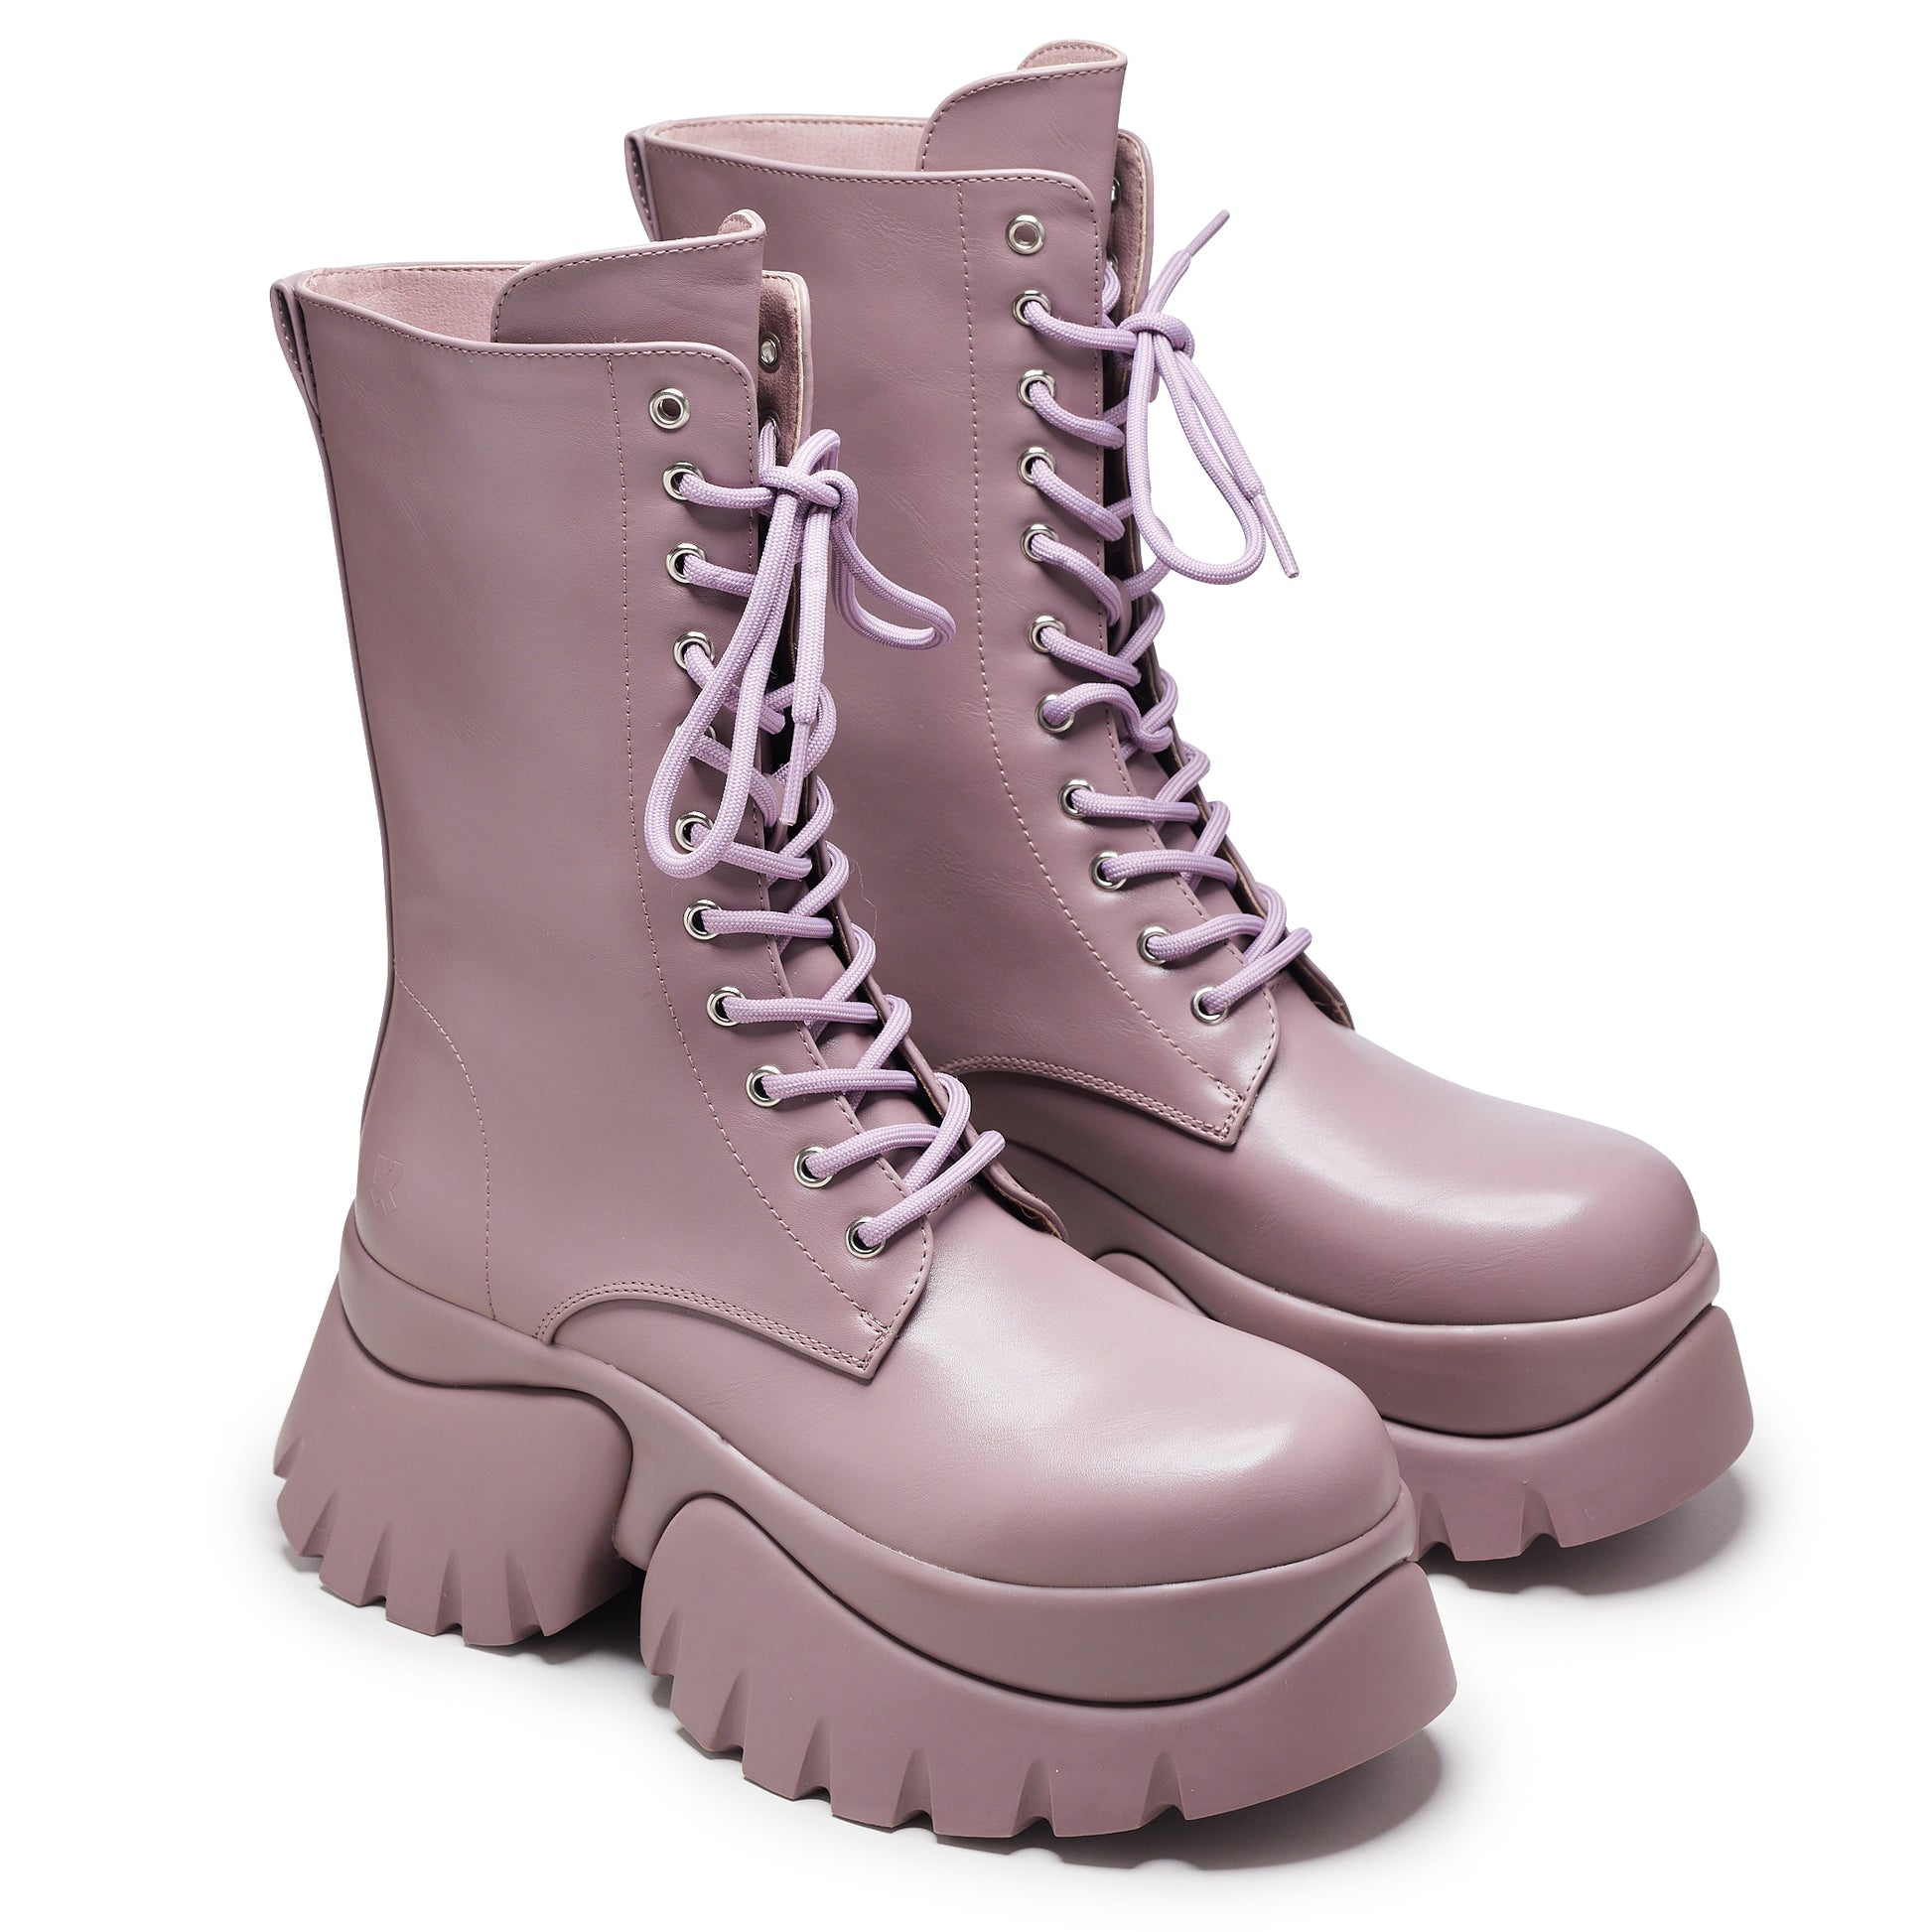 Costal Cruiser Vilun Ankle Boots - Mauve - Ankle Boots - KOI Footwear - Purple - Three-Quarter View